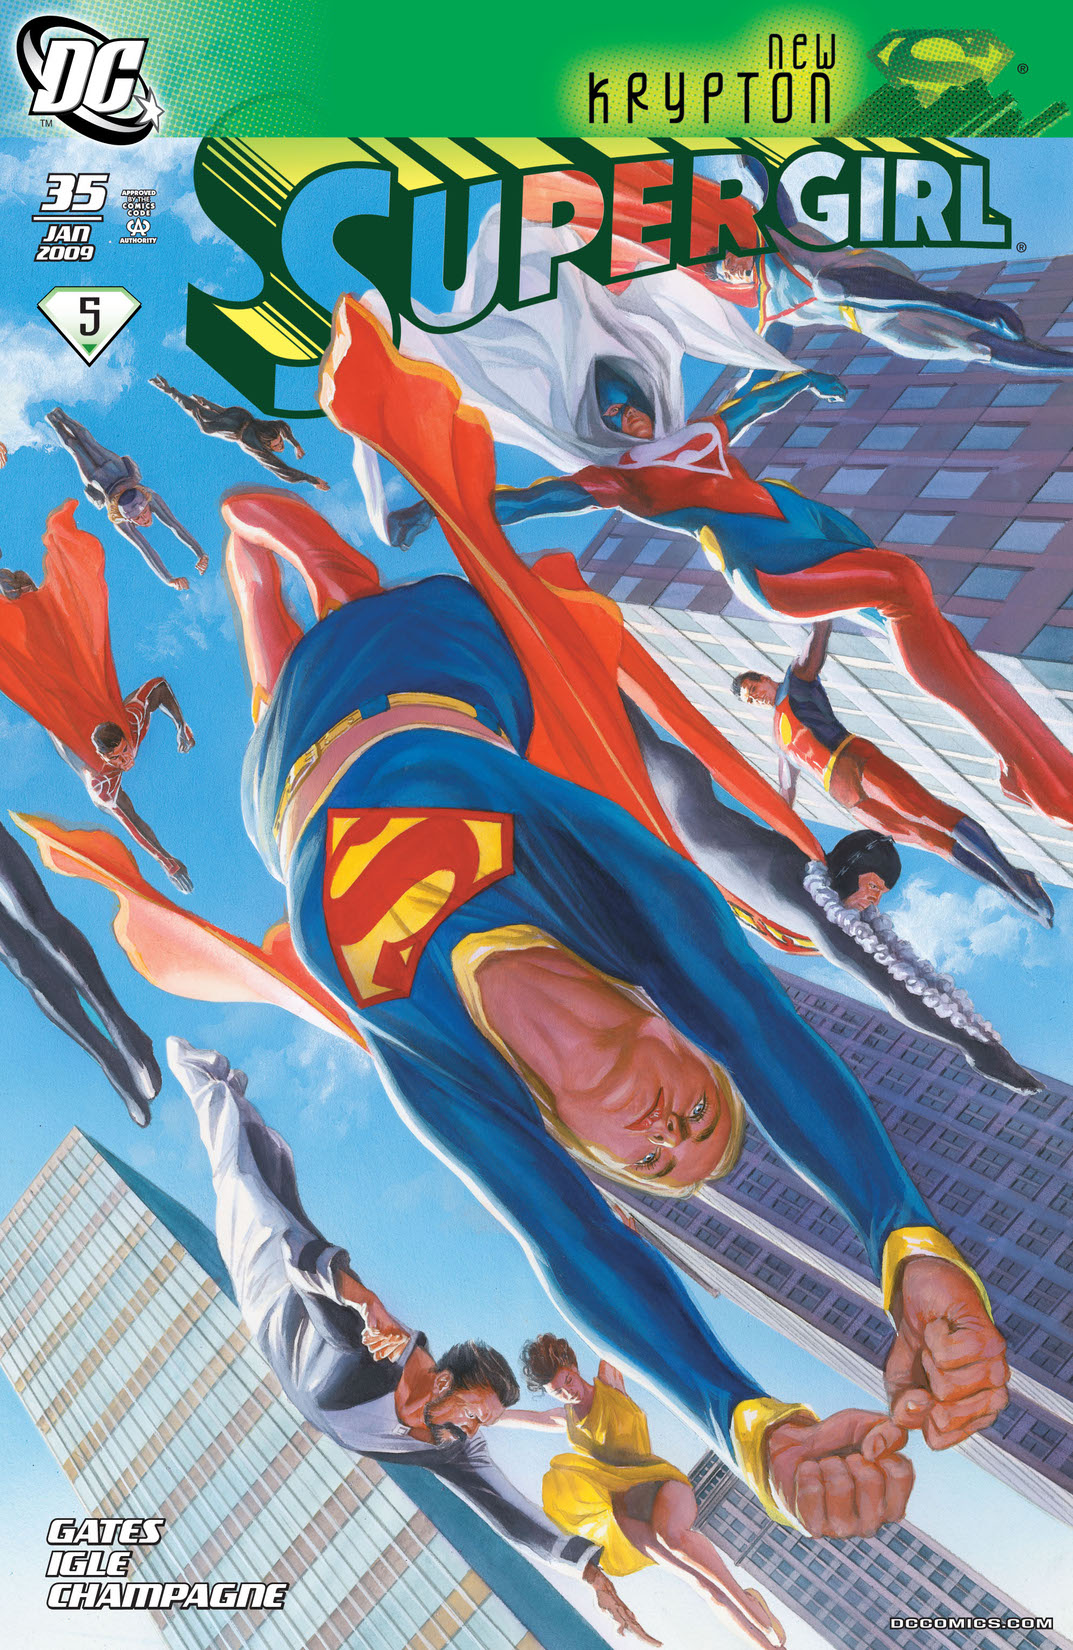 Supergirl (2005-) #35 preview images